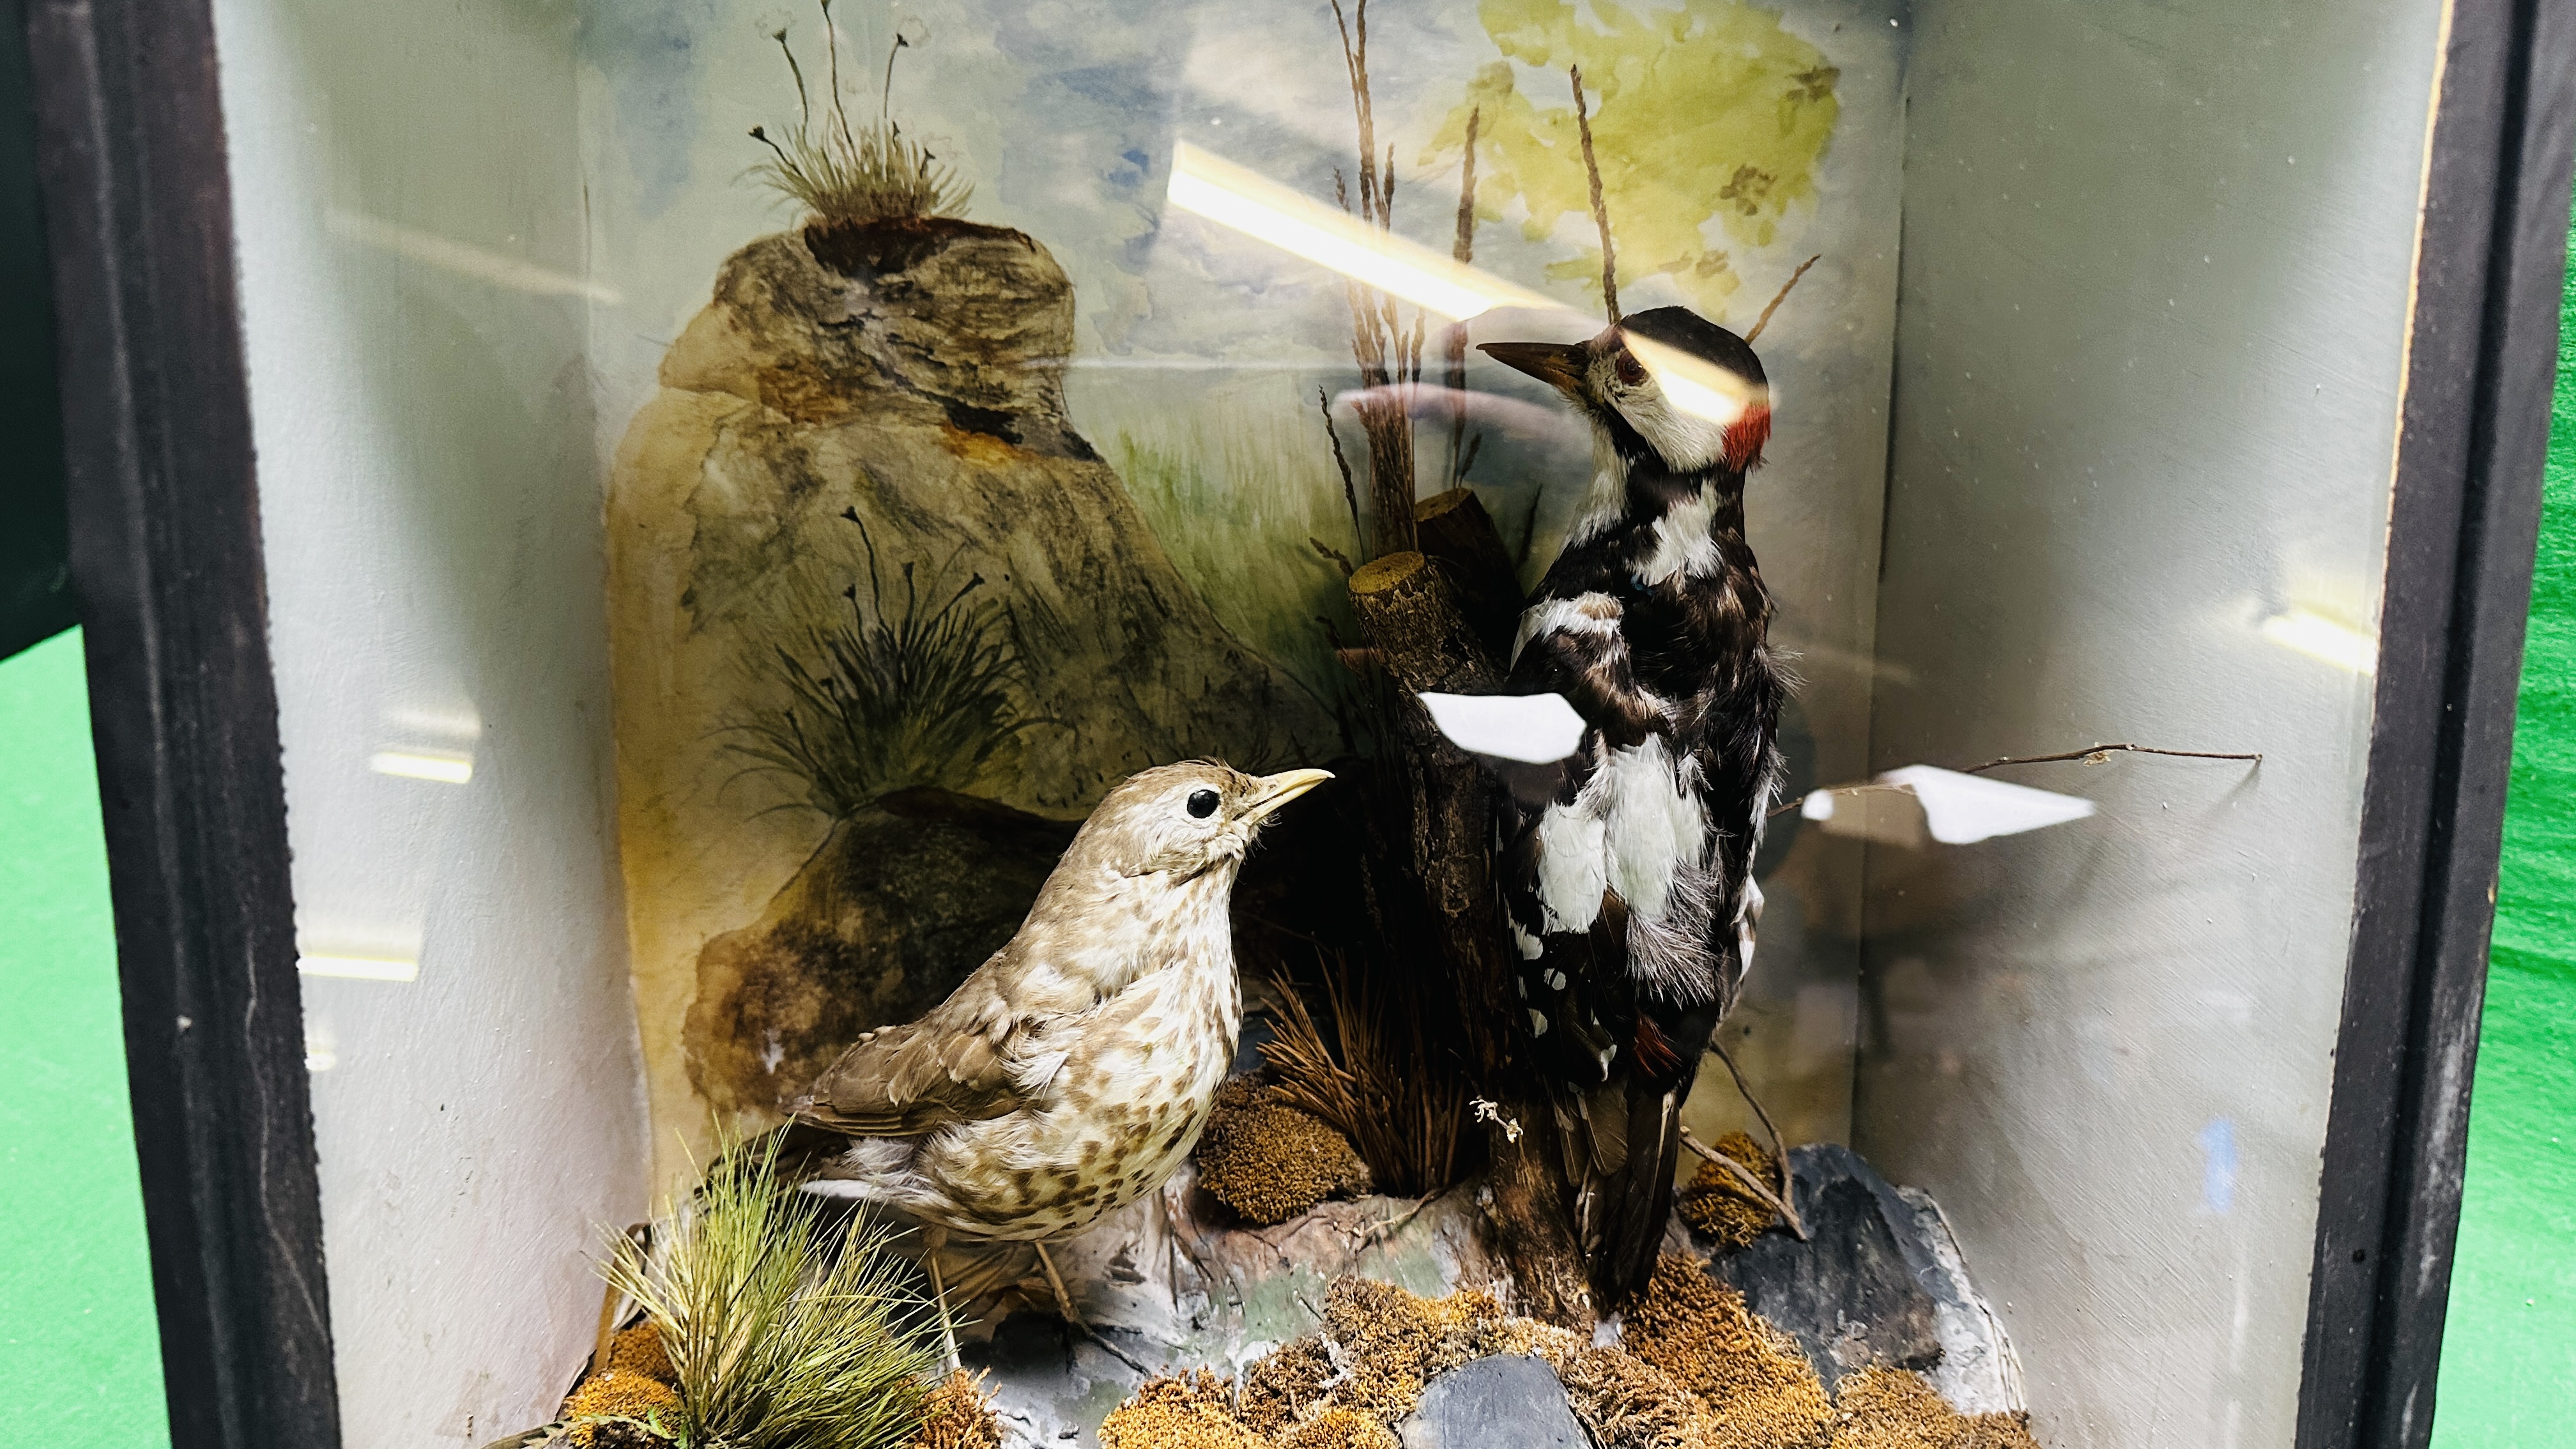 TAXIDERMY: A CASED STUDY OF A MOUNTED GREATER SPOTTED WOODPECKER AND A THRUSH IN A NATURALISTIC - Image 5 of 7